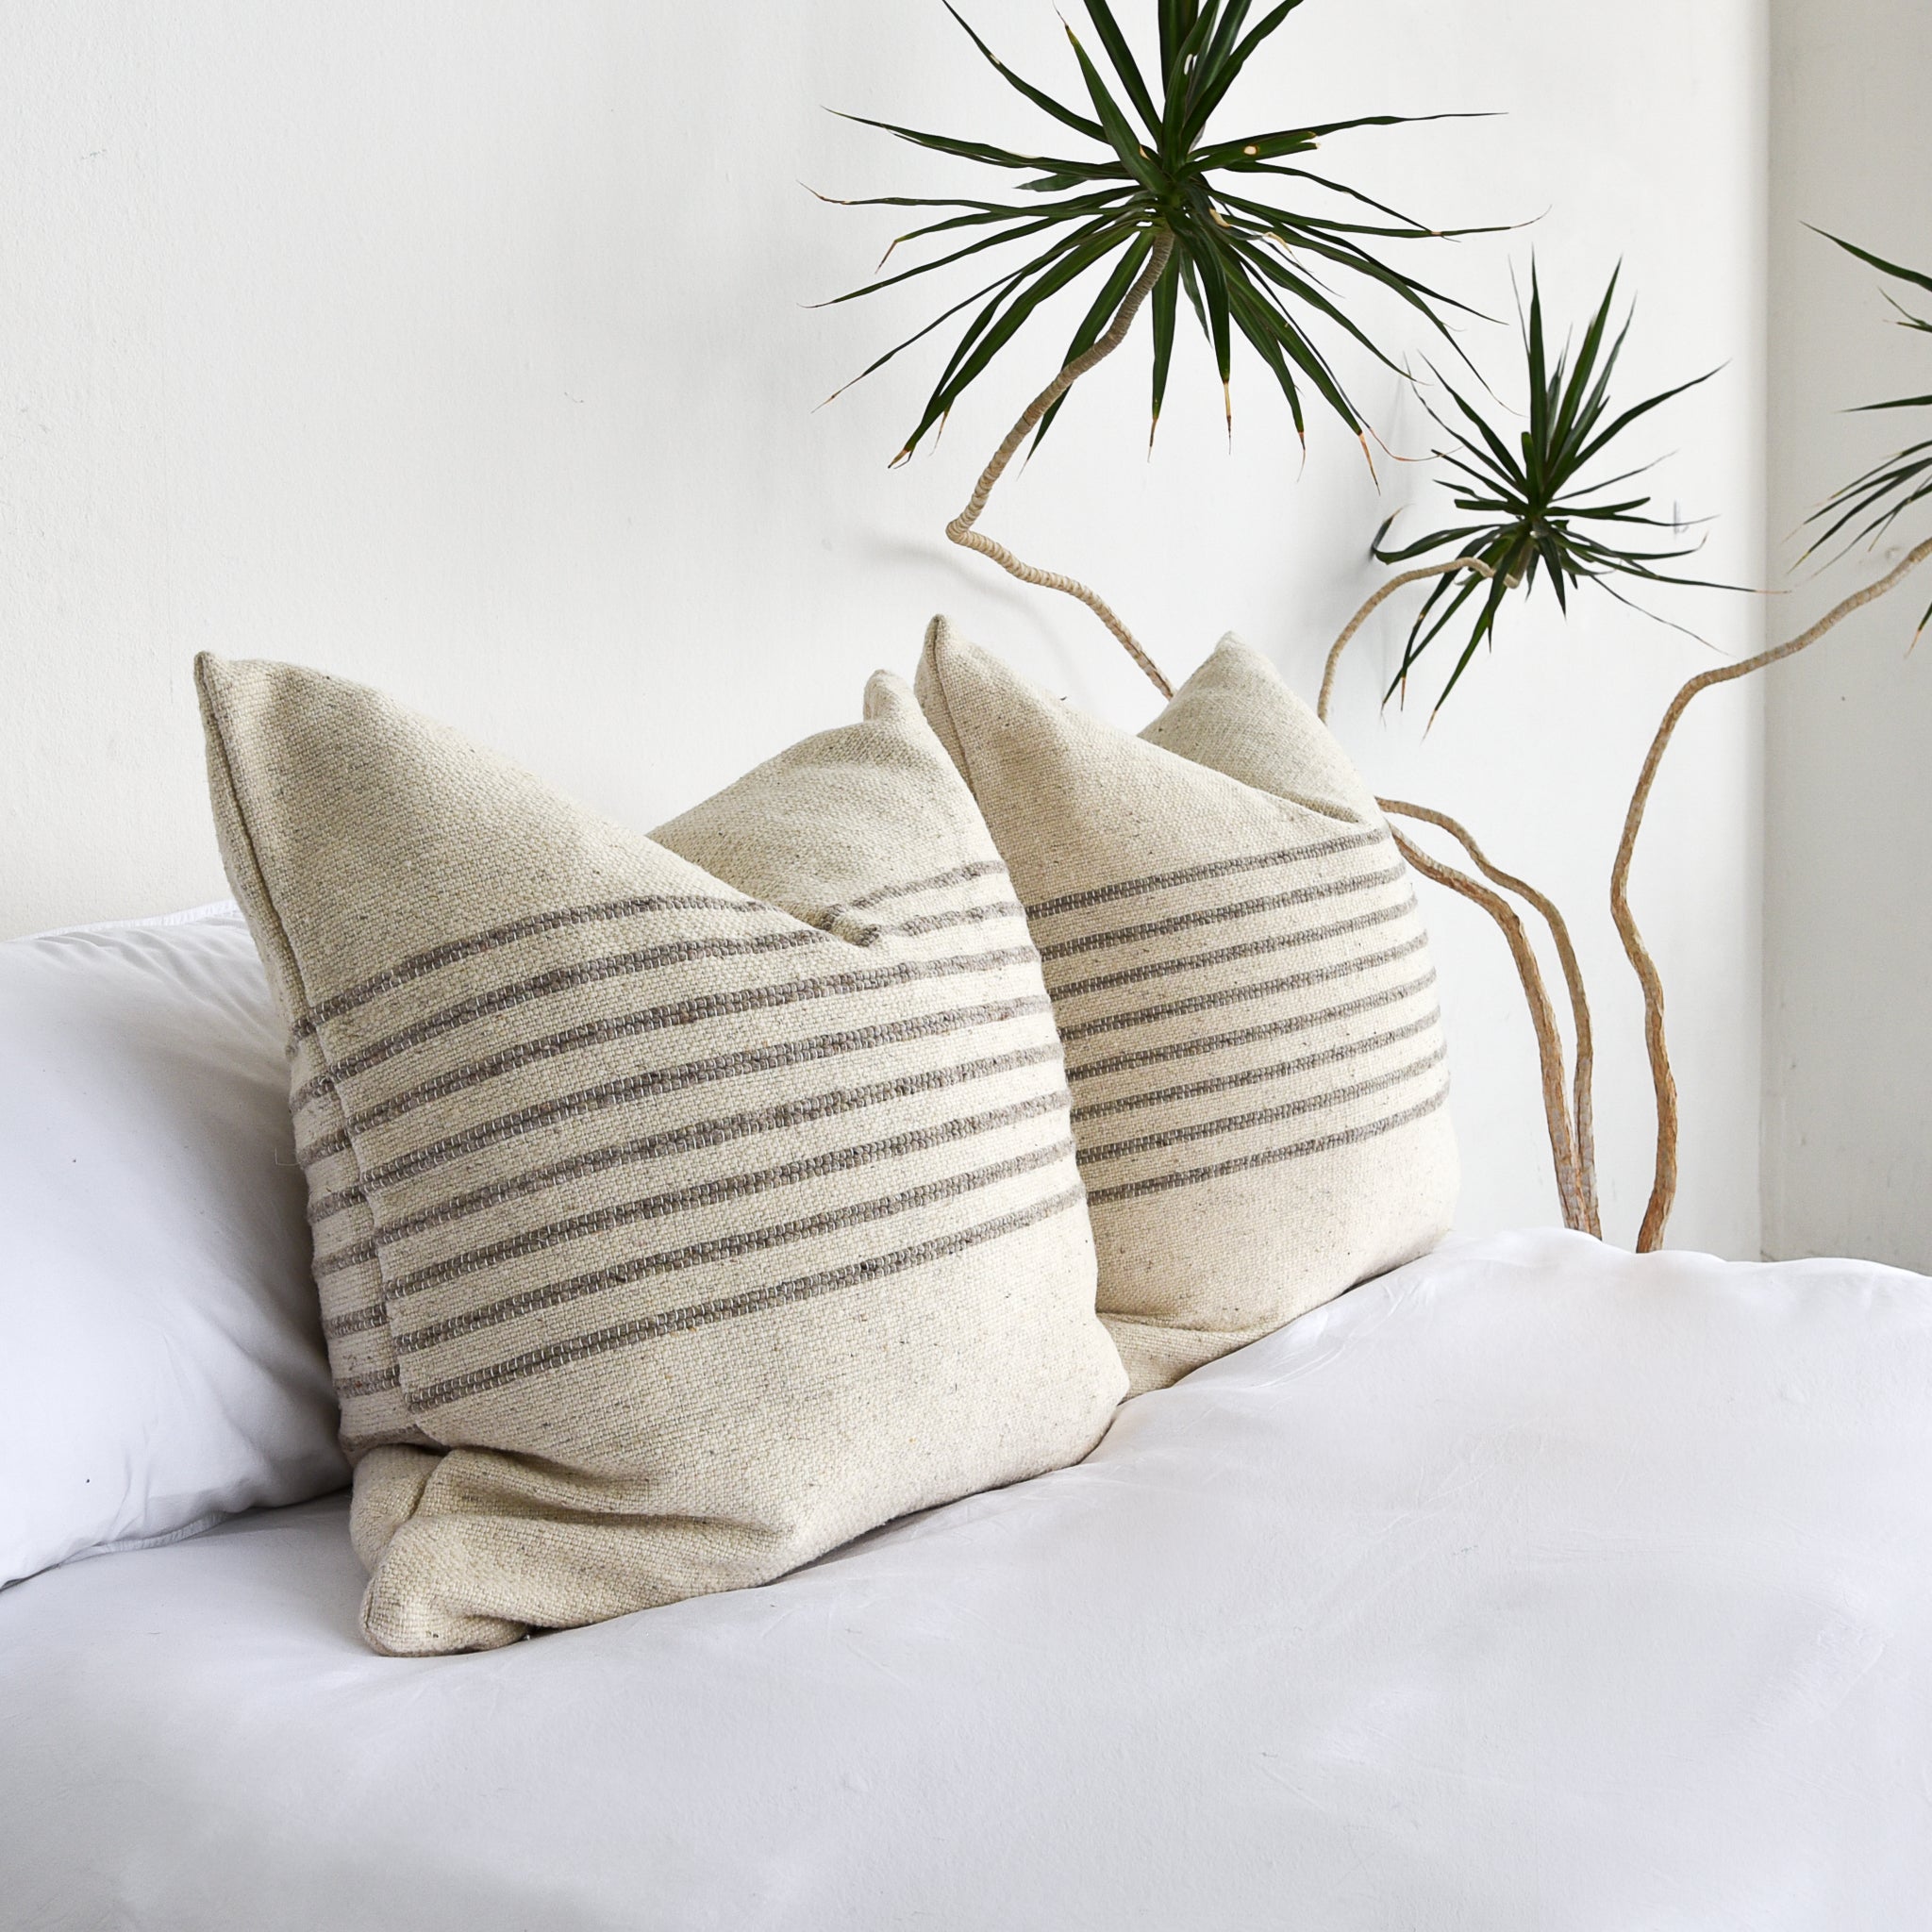  Accent Pillows For Bedroom